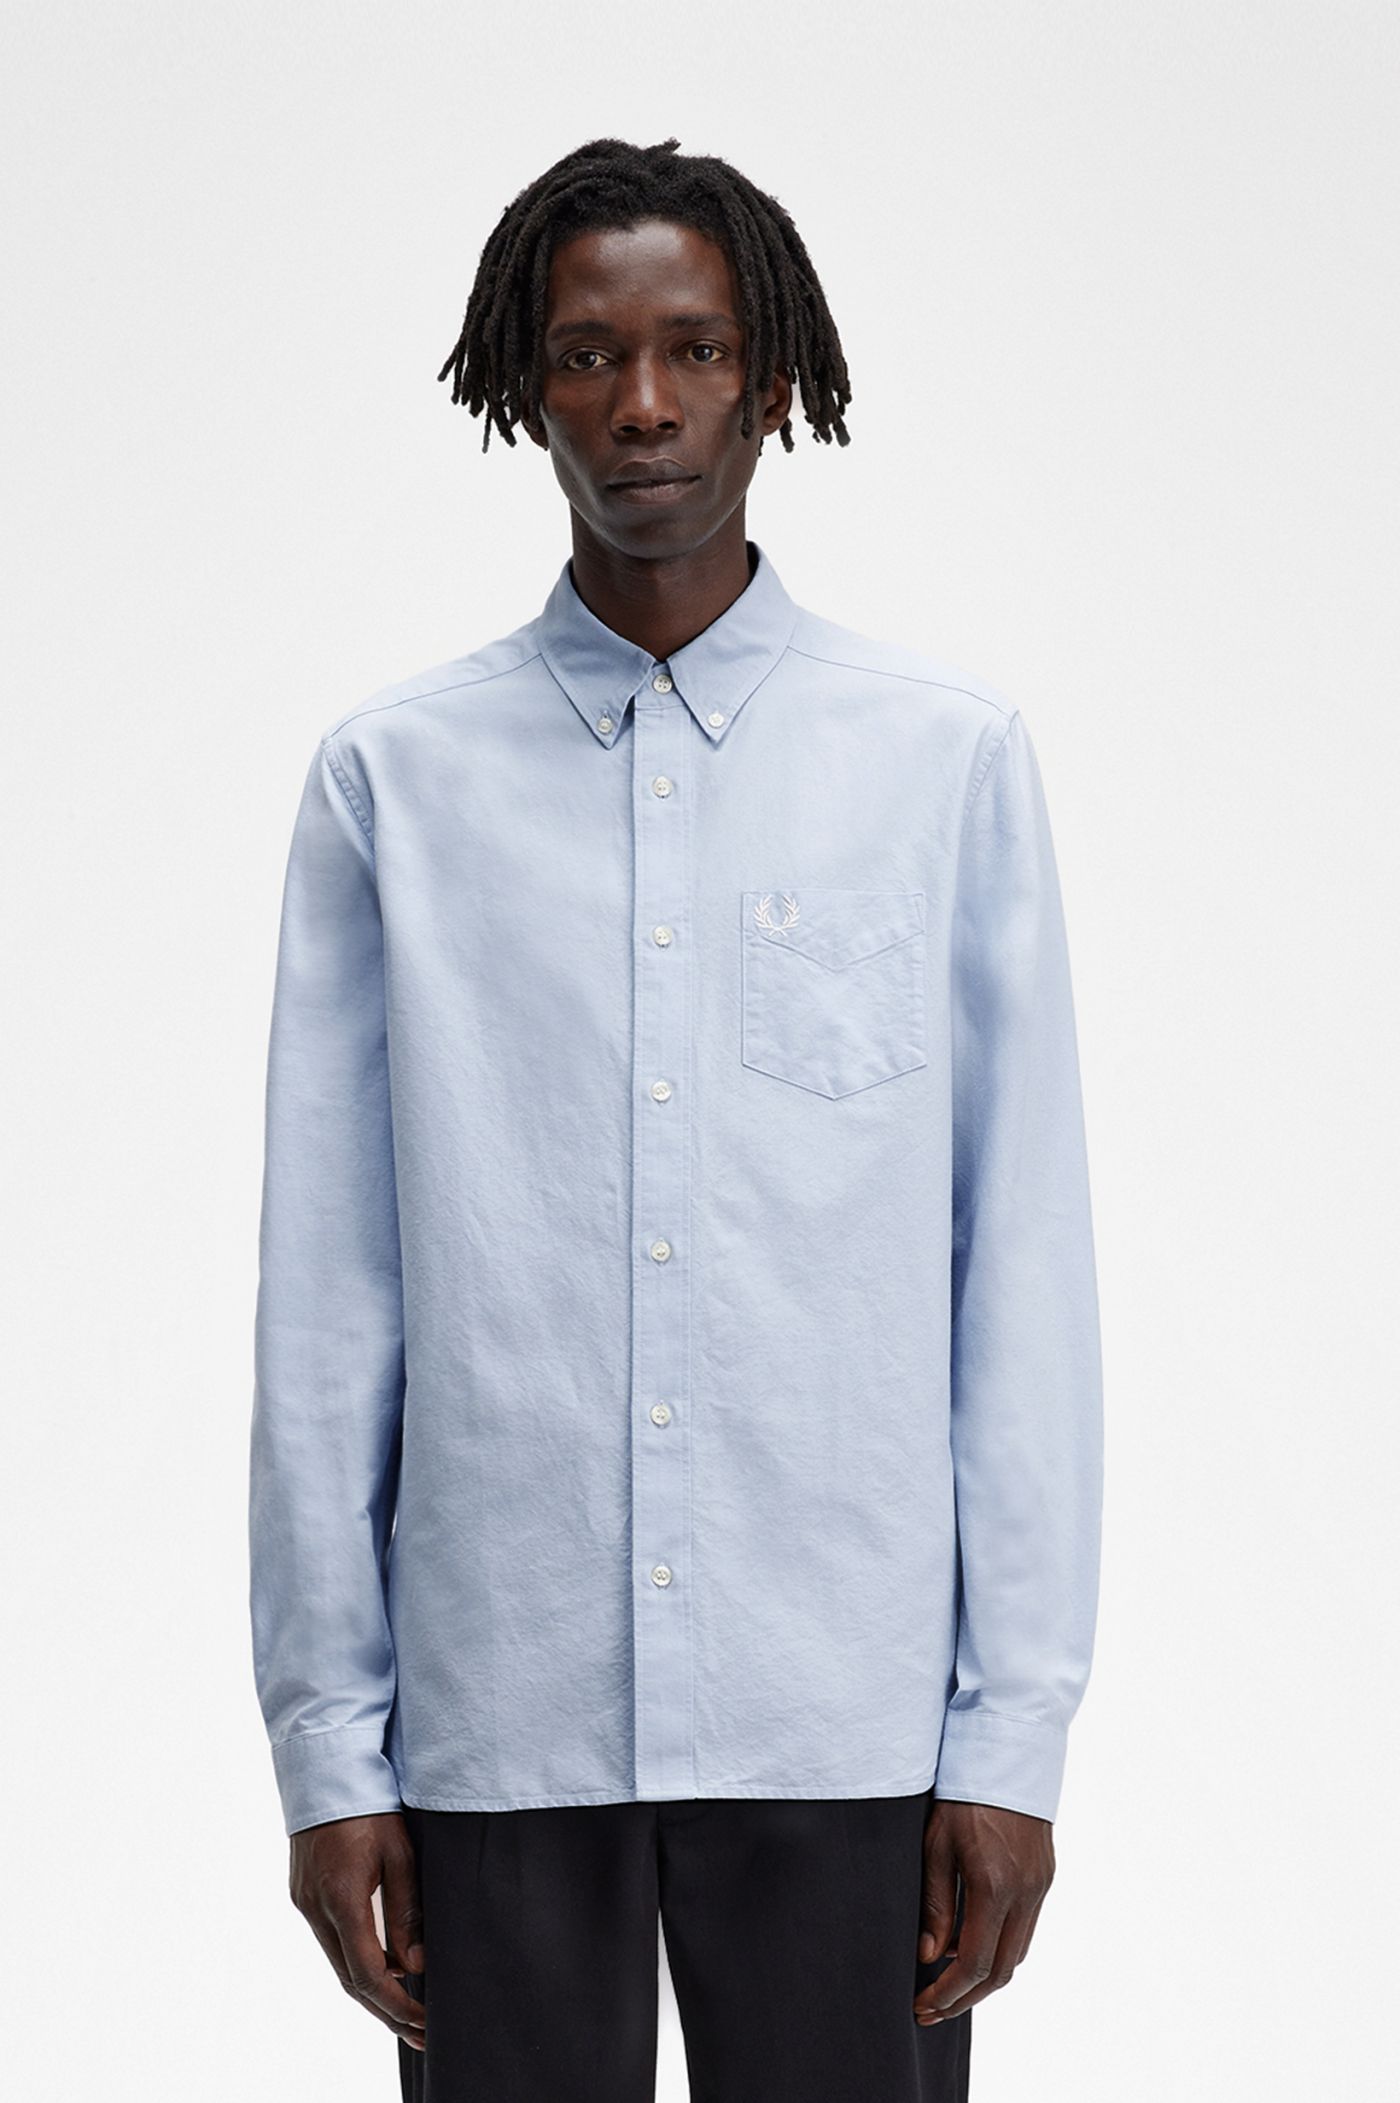 Oxford Shirt - Light Smoke | Men's Shirts | Fred Perry UK - Fred Perry